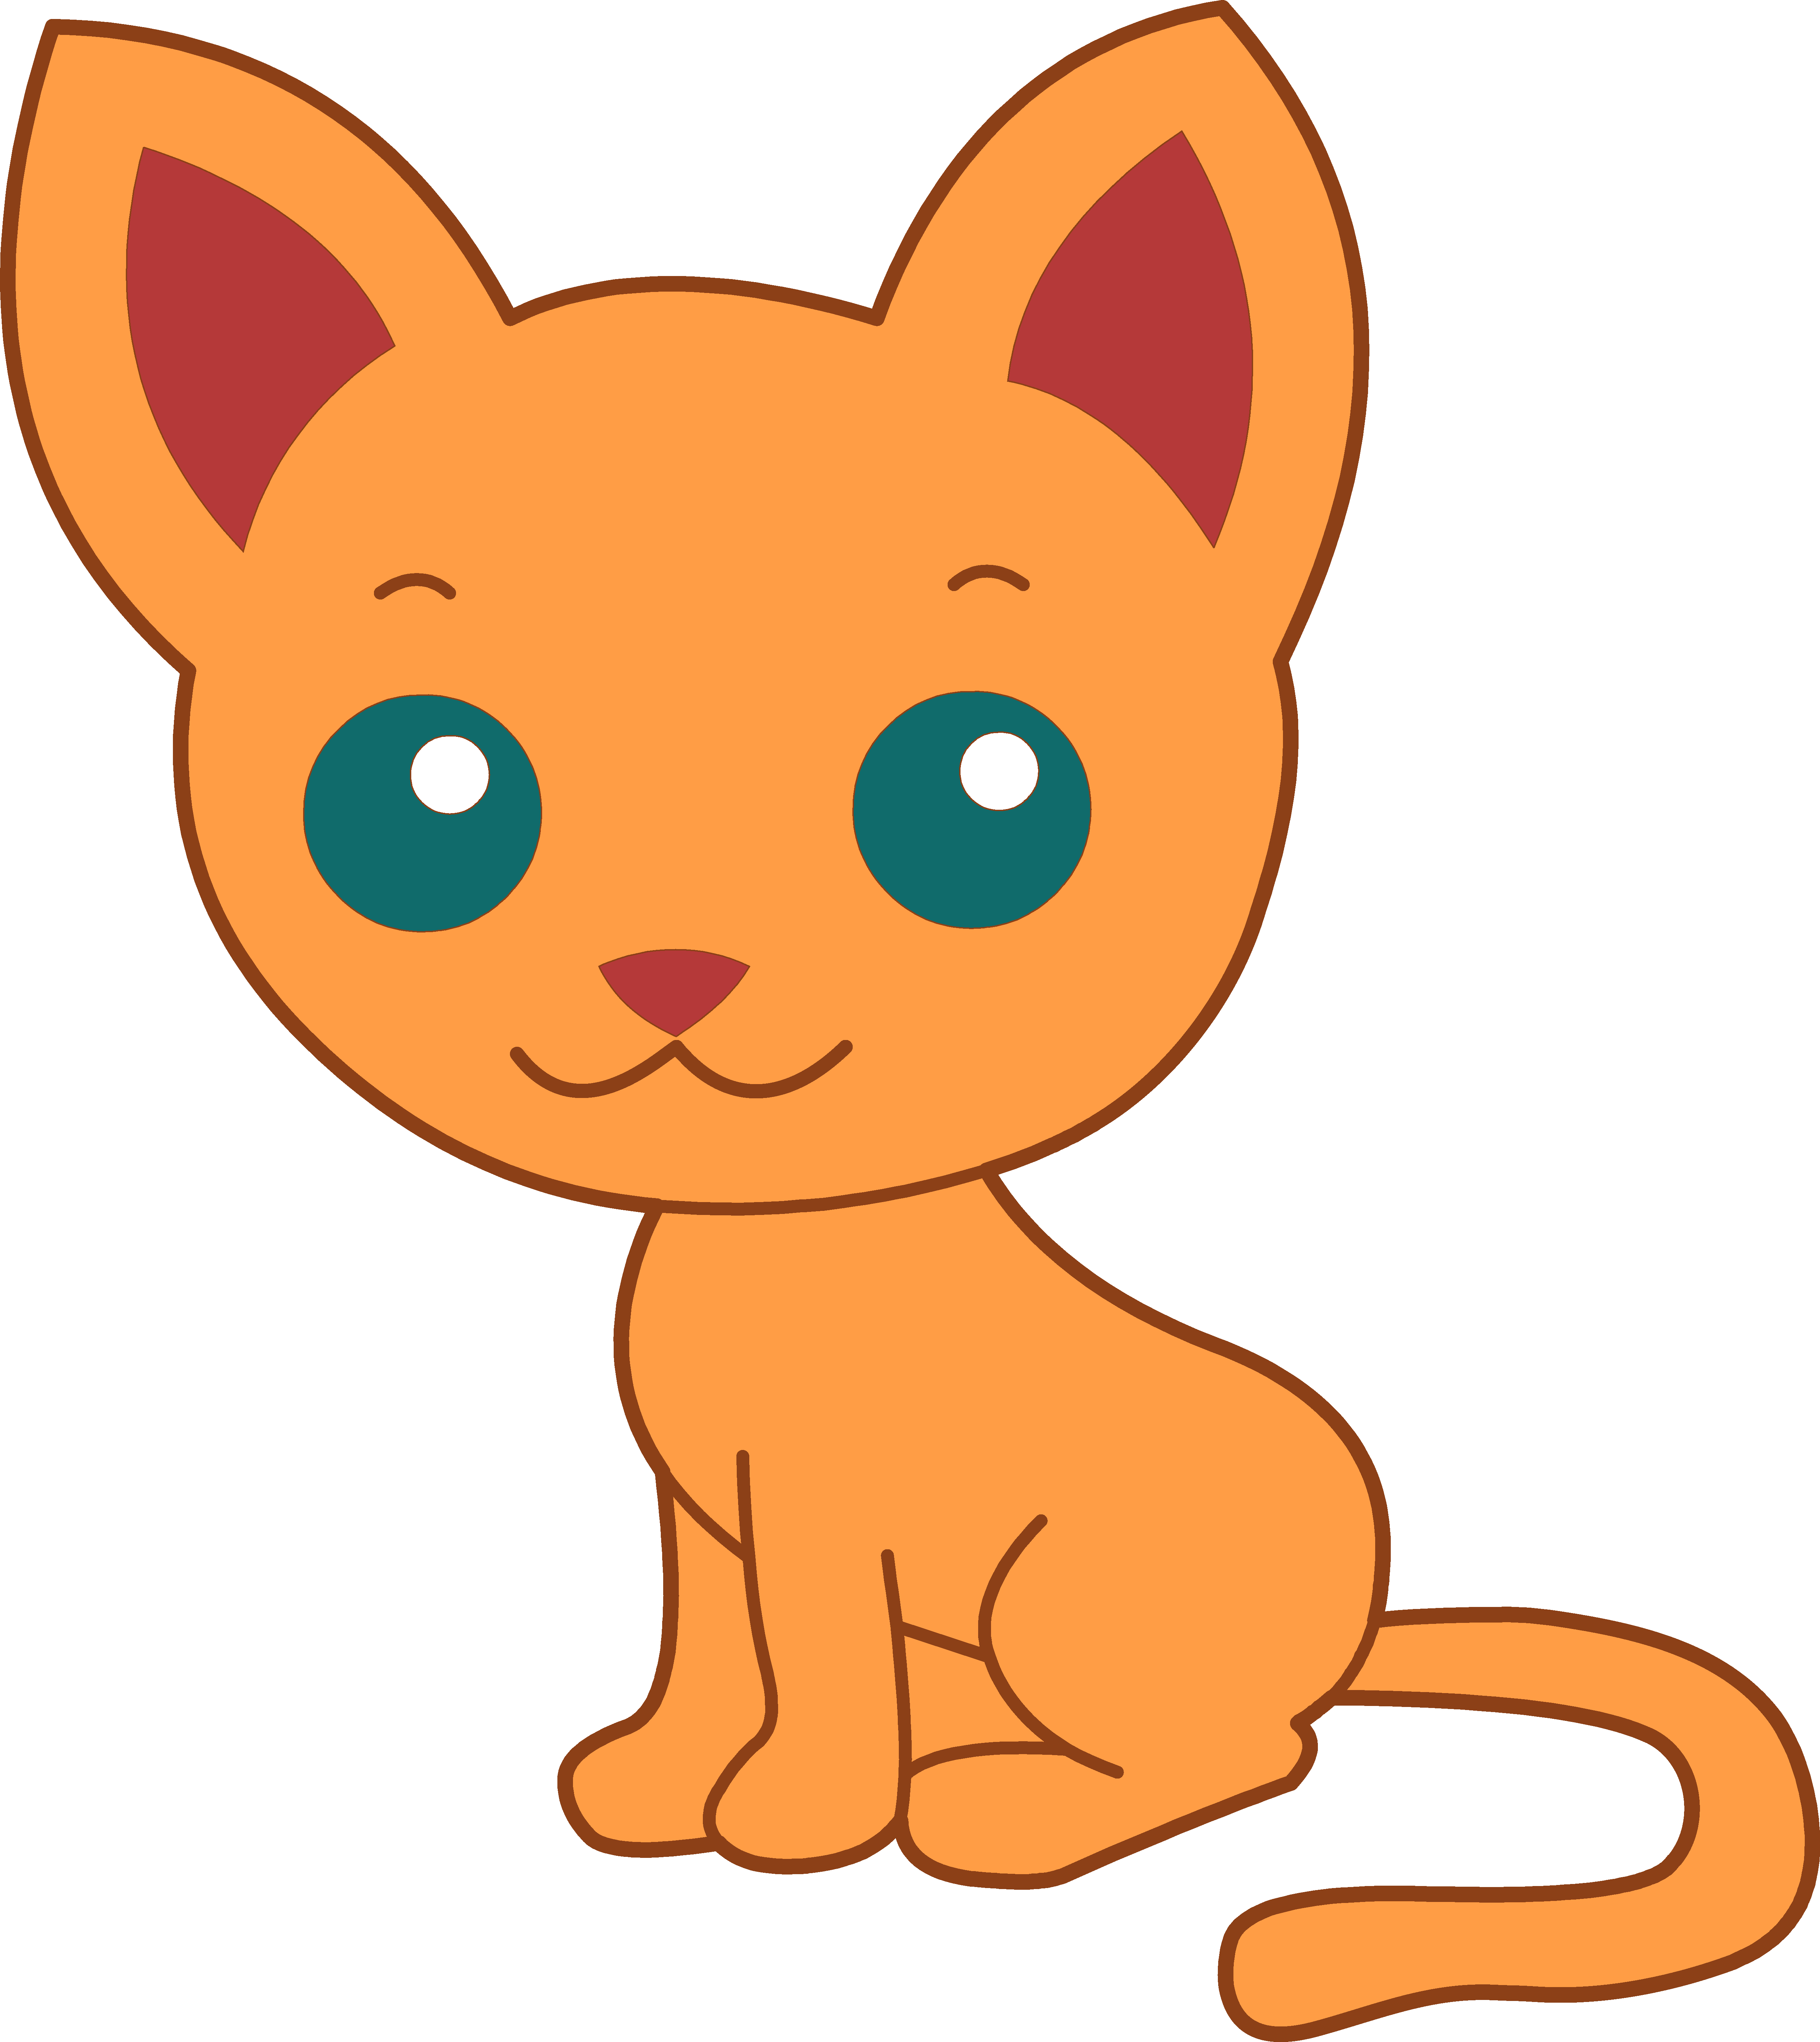 Free Images Cartoon Cats, Download Free Images Cartoon Cats png images